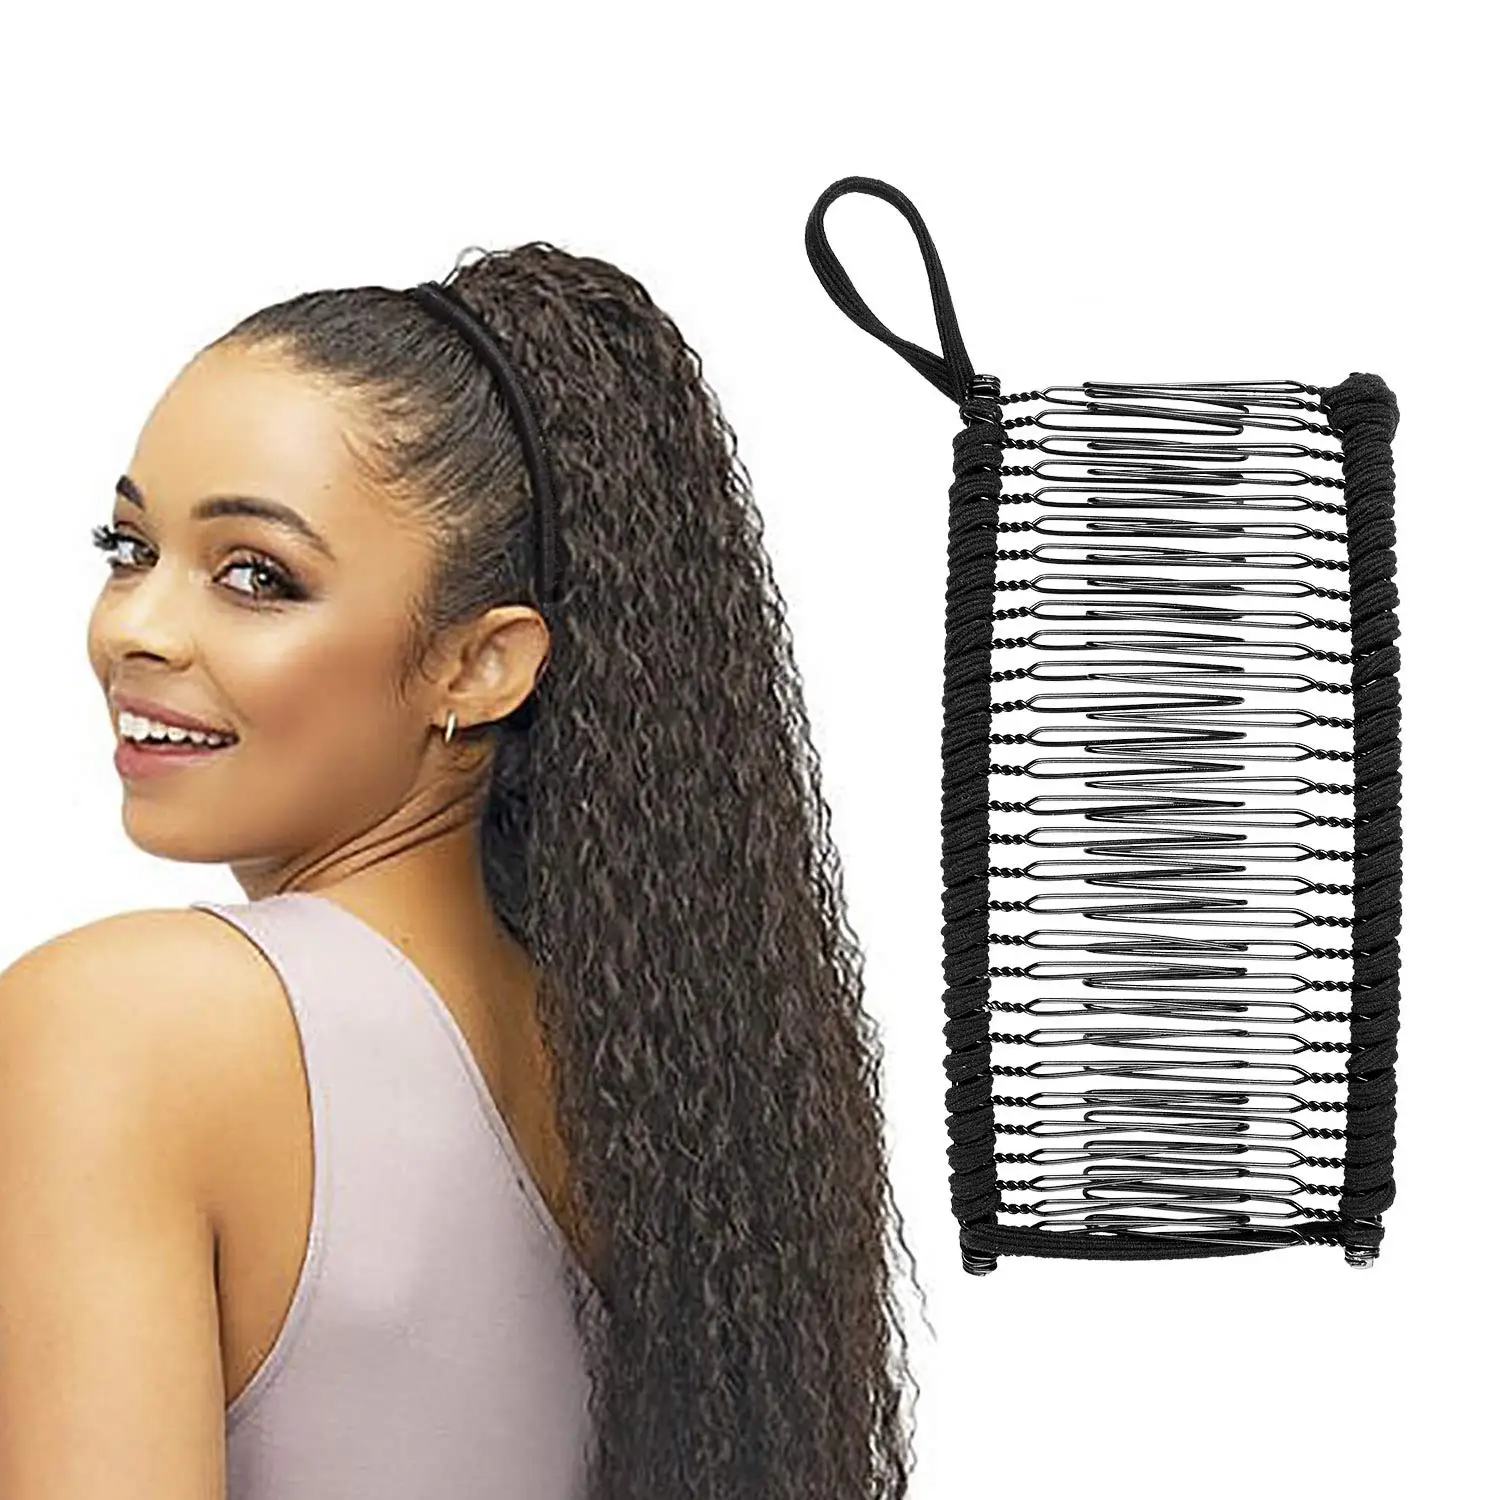 Wholesale Vintage Hair Accessories Stretch Banana Hair Clip Comb For Black  Women - Buy Banana Hair Clip Comb,Banana Hair Clips For Women,Banana Hair  Comb Product on 